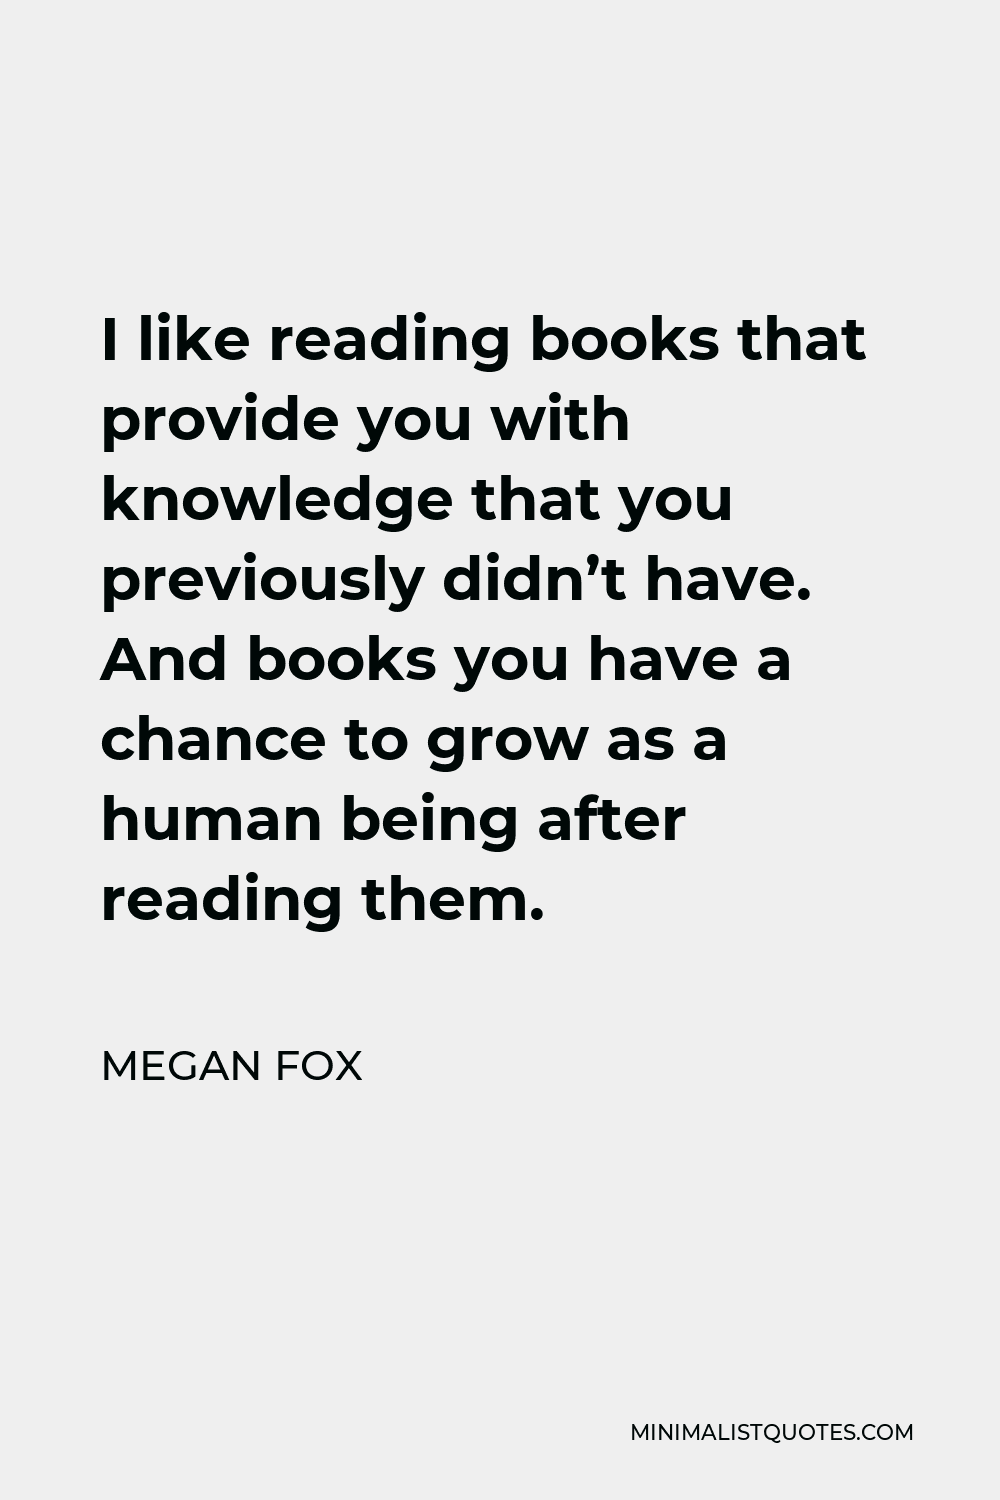 Megan Fox Quote - I like reading books that provide you with knowledge that you previously didn’t have. And books you have a chance to grow as a human being after reading them.